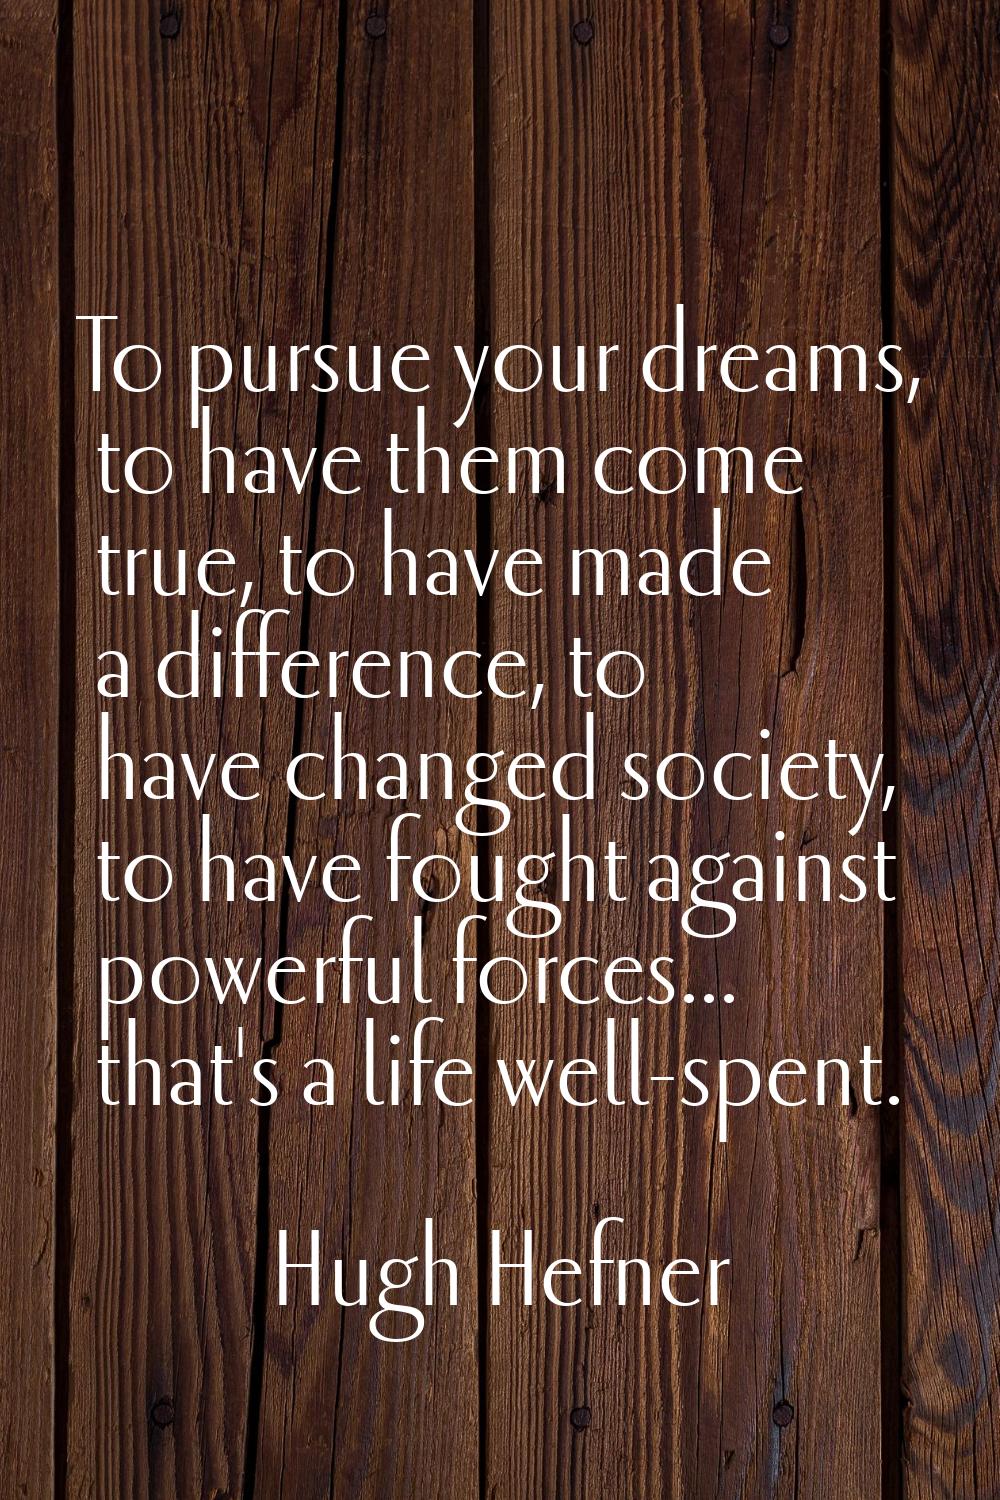 To pursue your dreams, to have them come true, to have made a difference, to have changed society, 